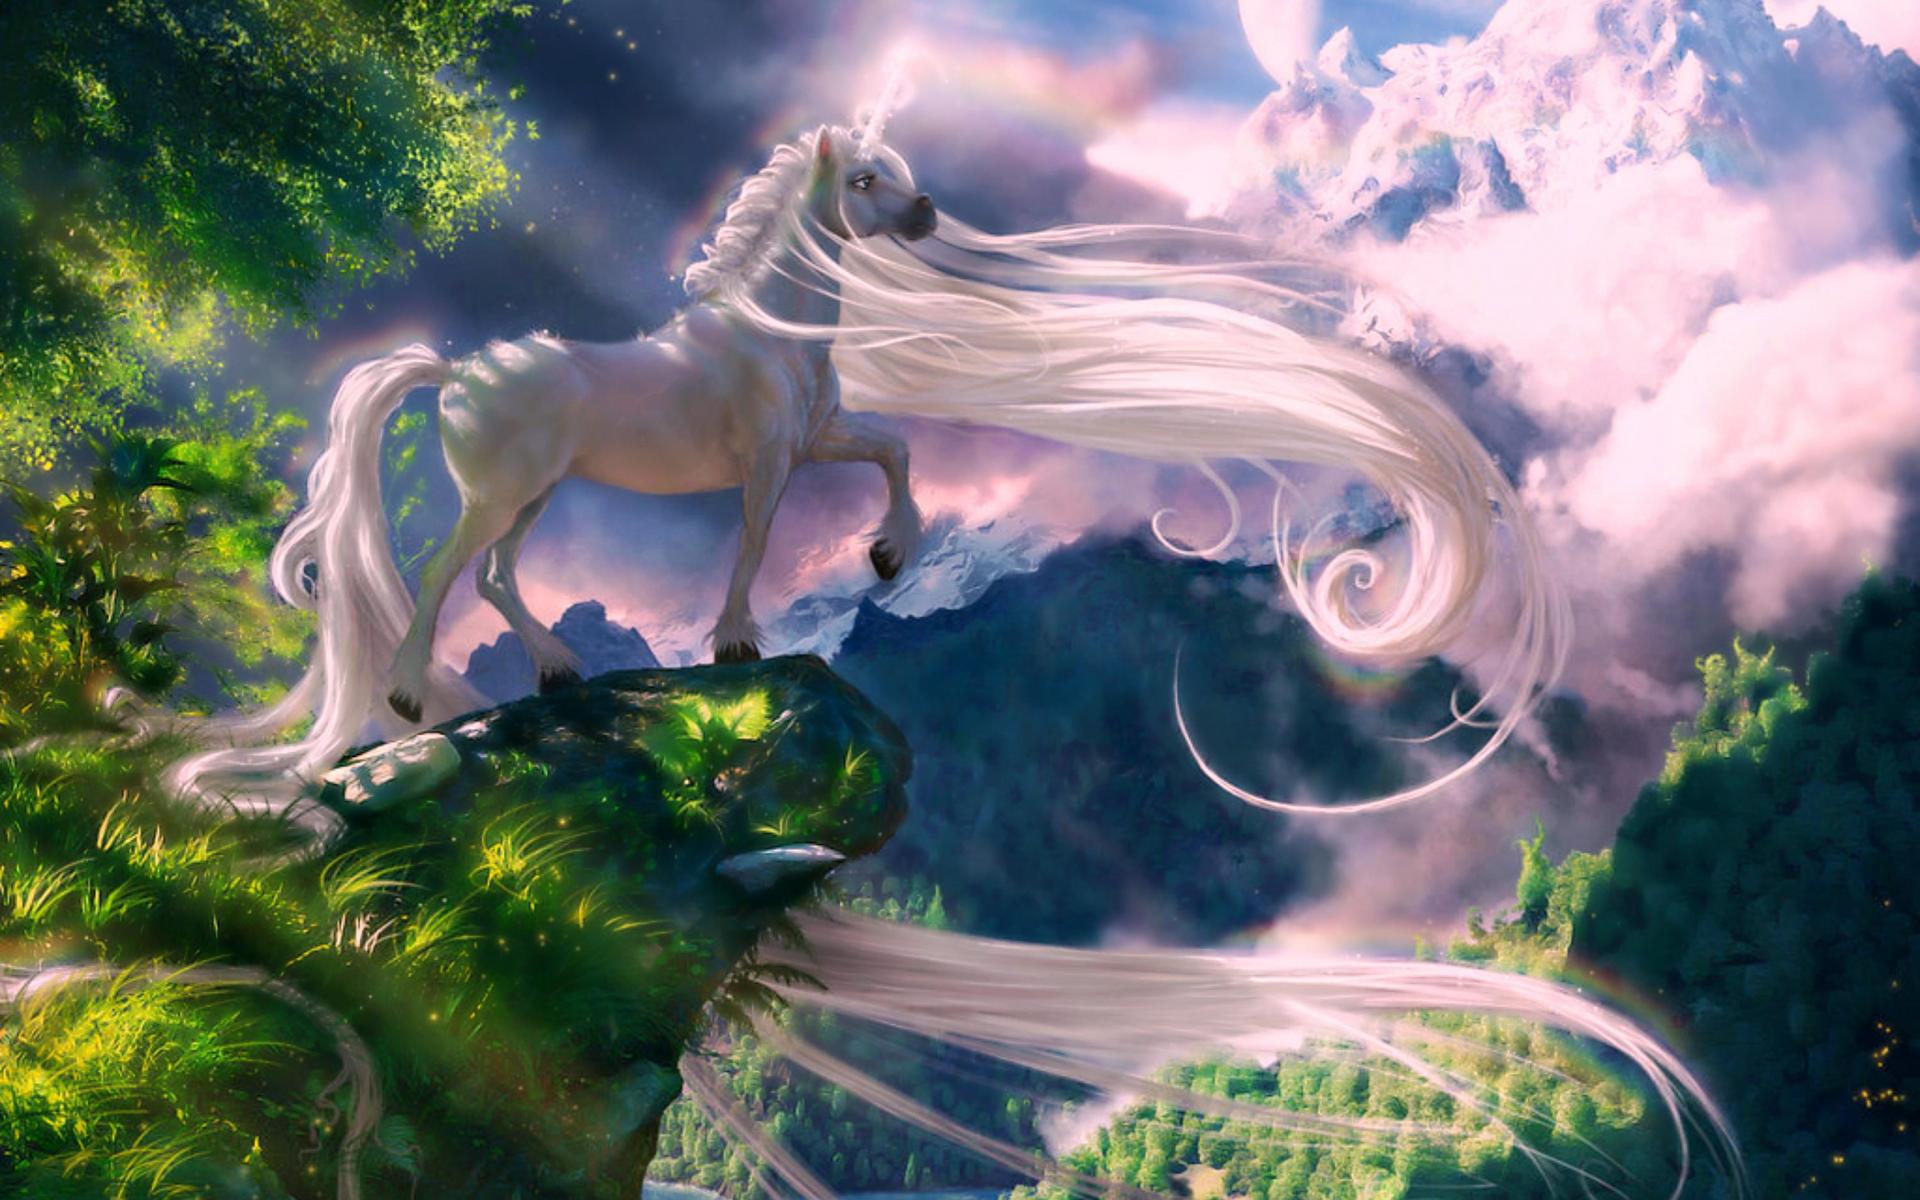 A white horse with long hair standing on top of the mountain - Unicorn